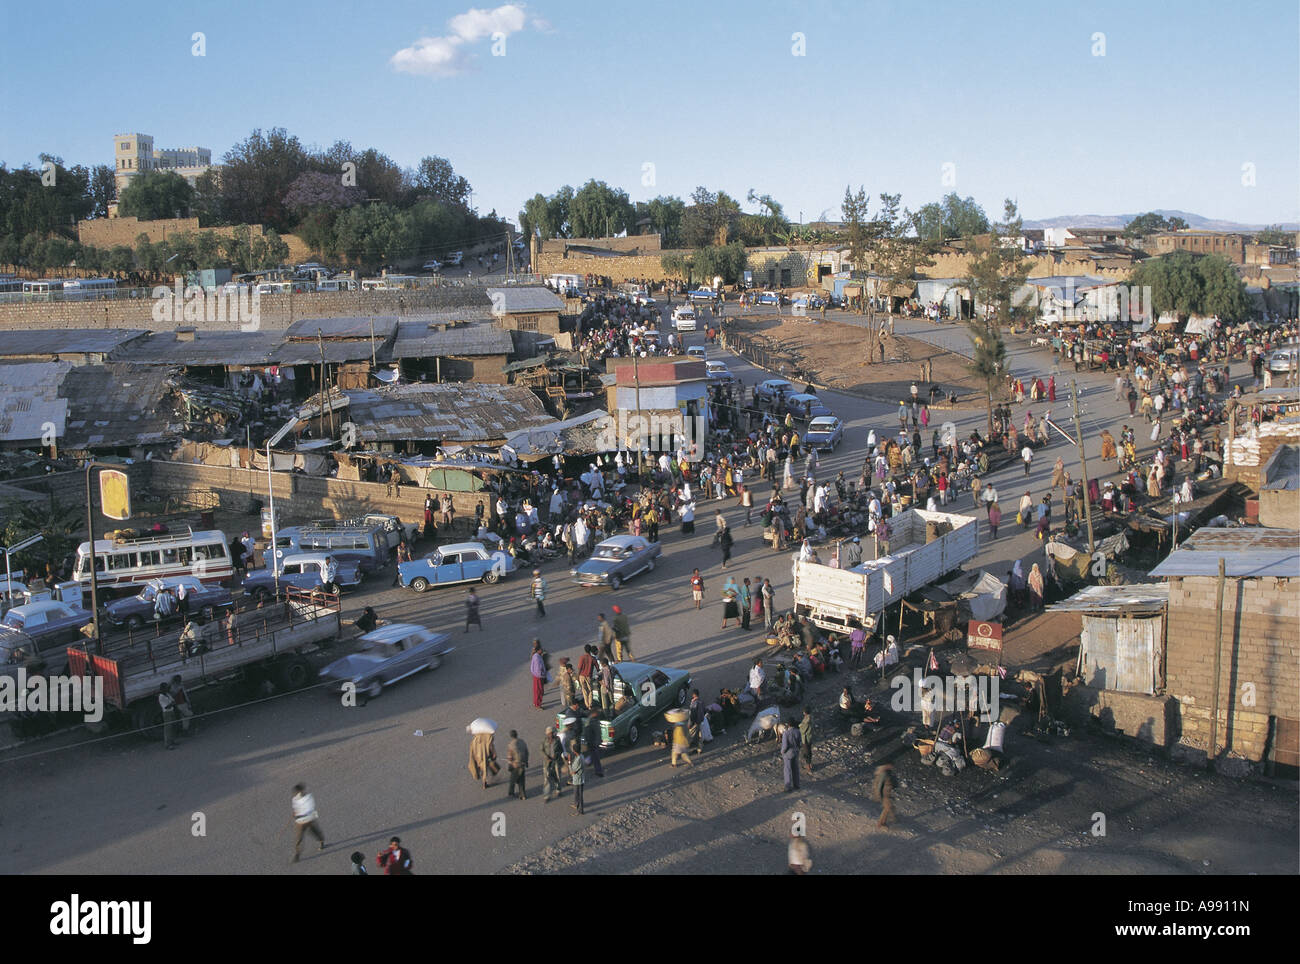 Busy market in Harer note old walls of city in background Ethiopia Stock Photo